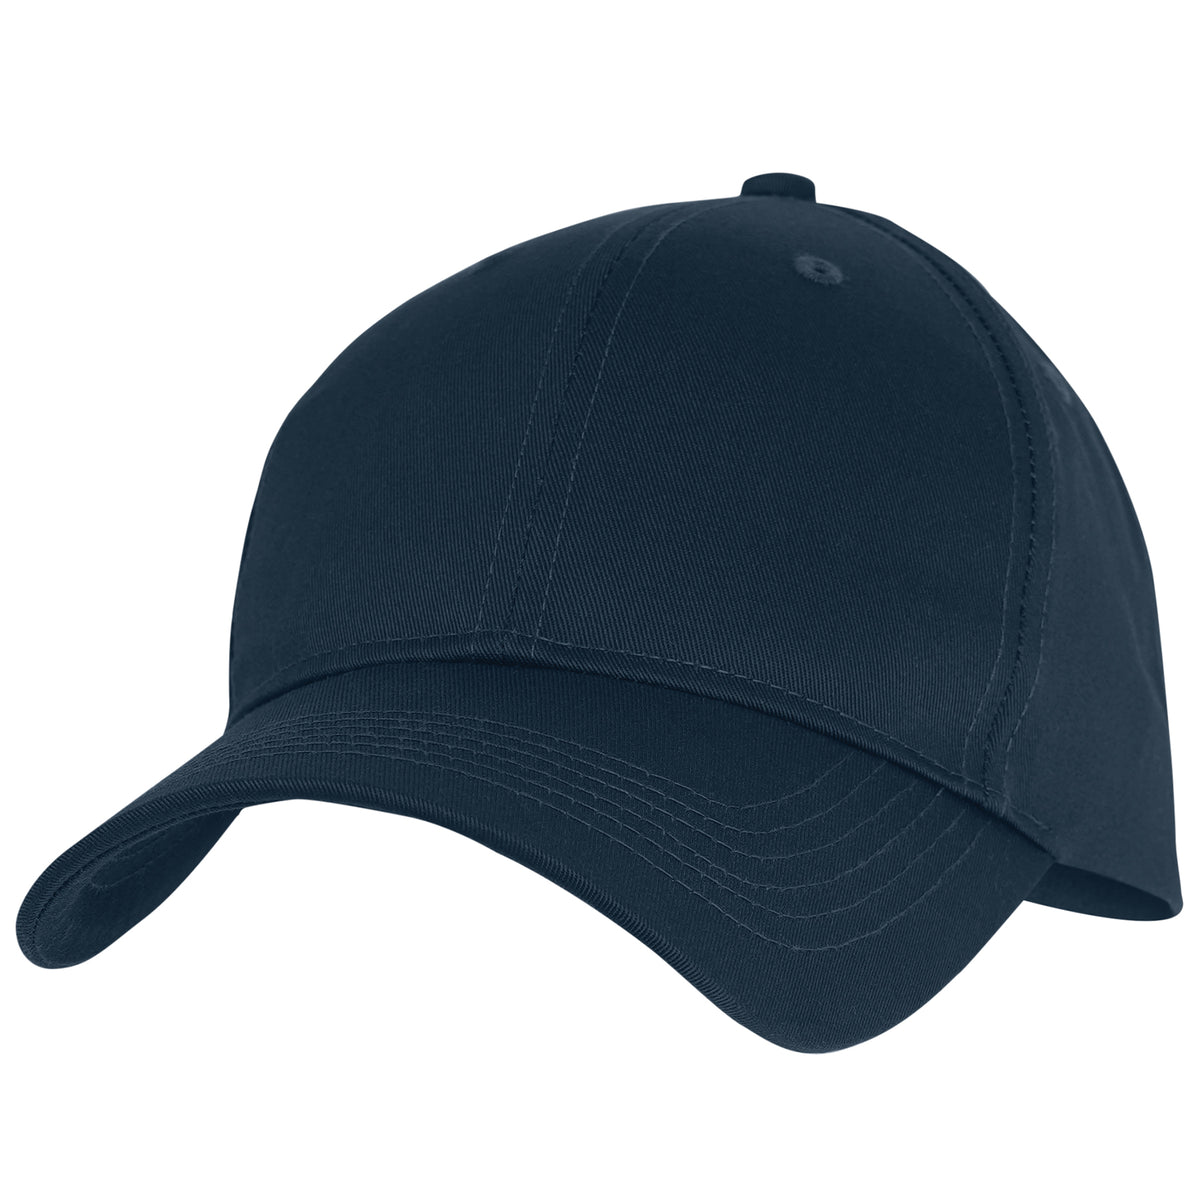 Rothco Navy Supreme Low Profile Insignia Cap - Navy Blue